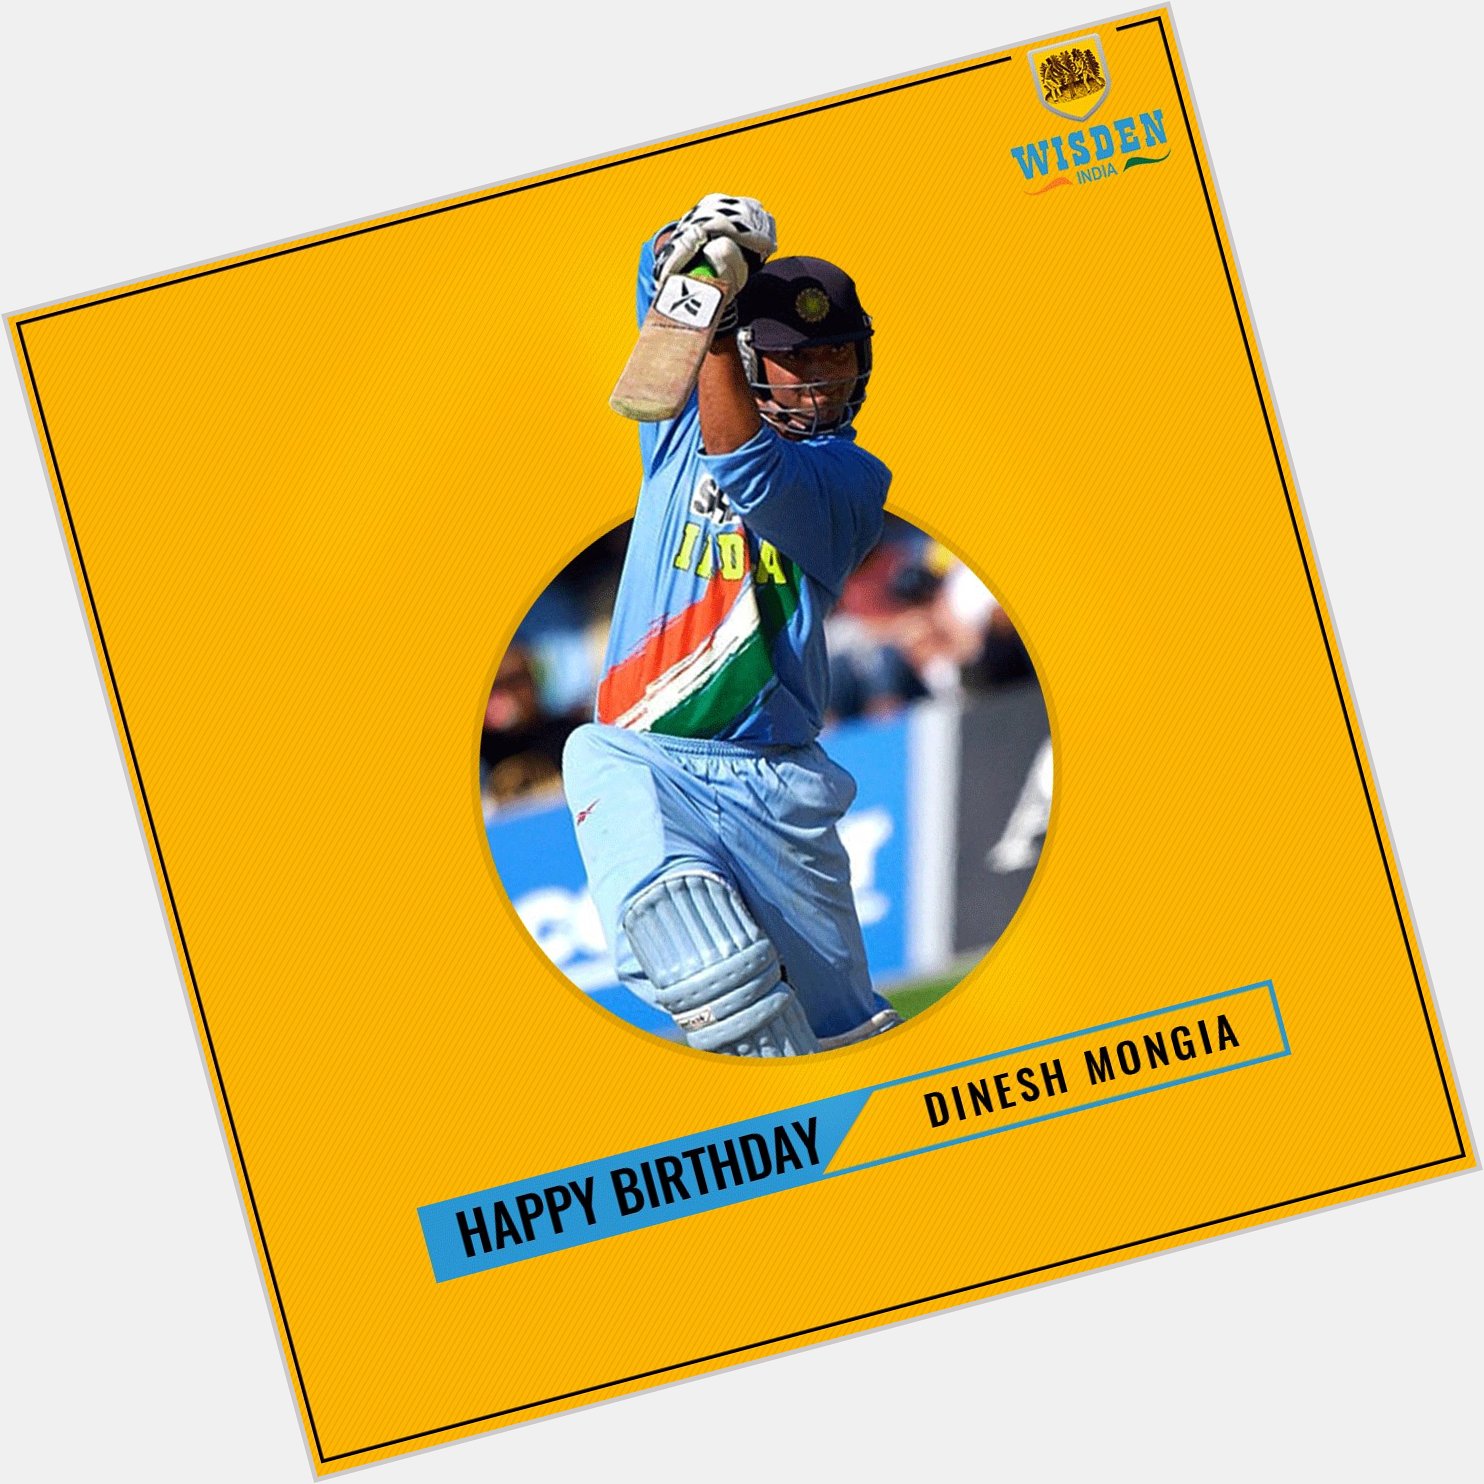 Happy Birthday to former Team India player Dinesh Mongia! 